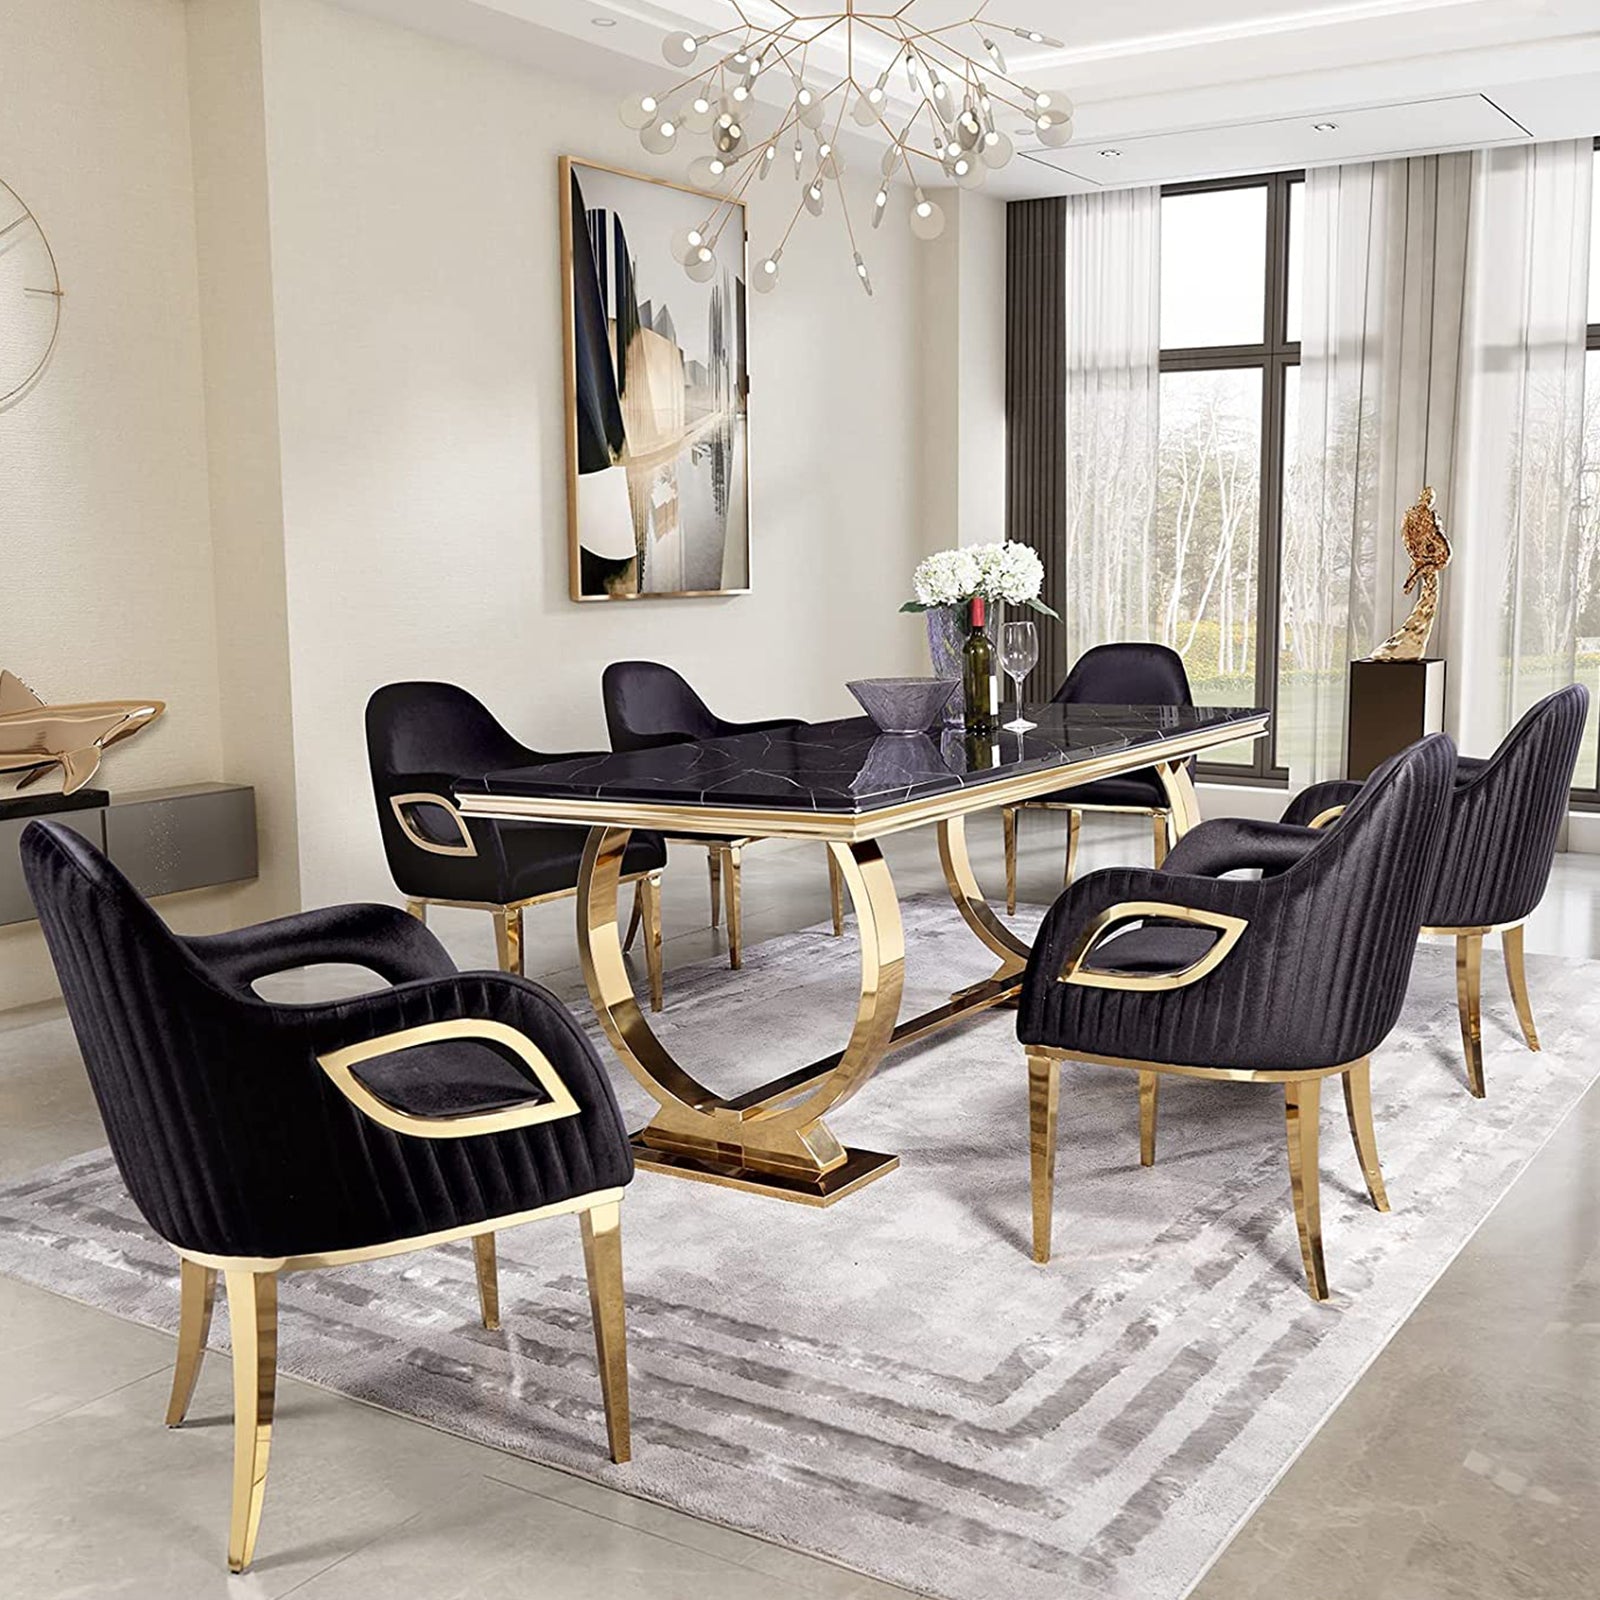 Enhance Your Dining Room with the AUZ Exquisite Black Velvet Semi-Circular Dining Chair